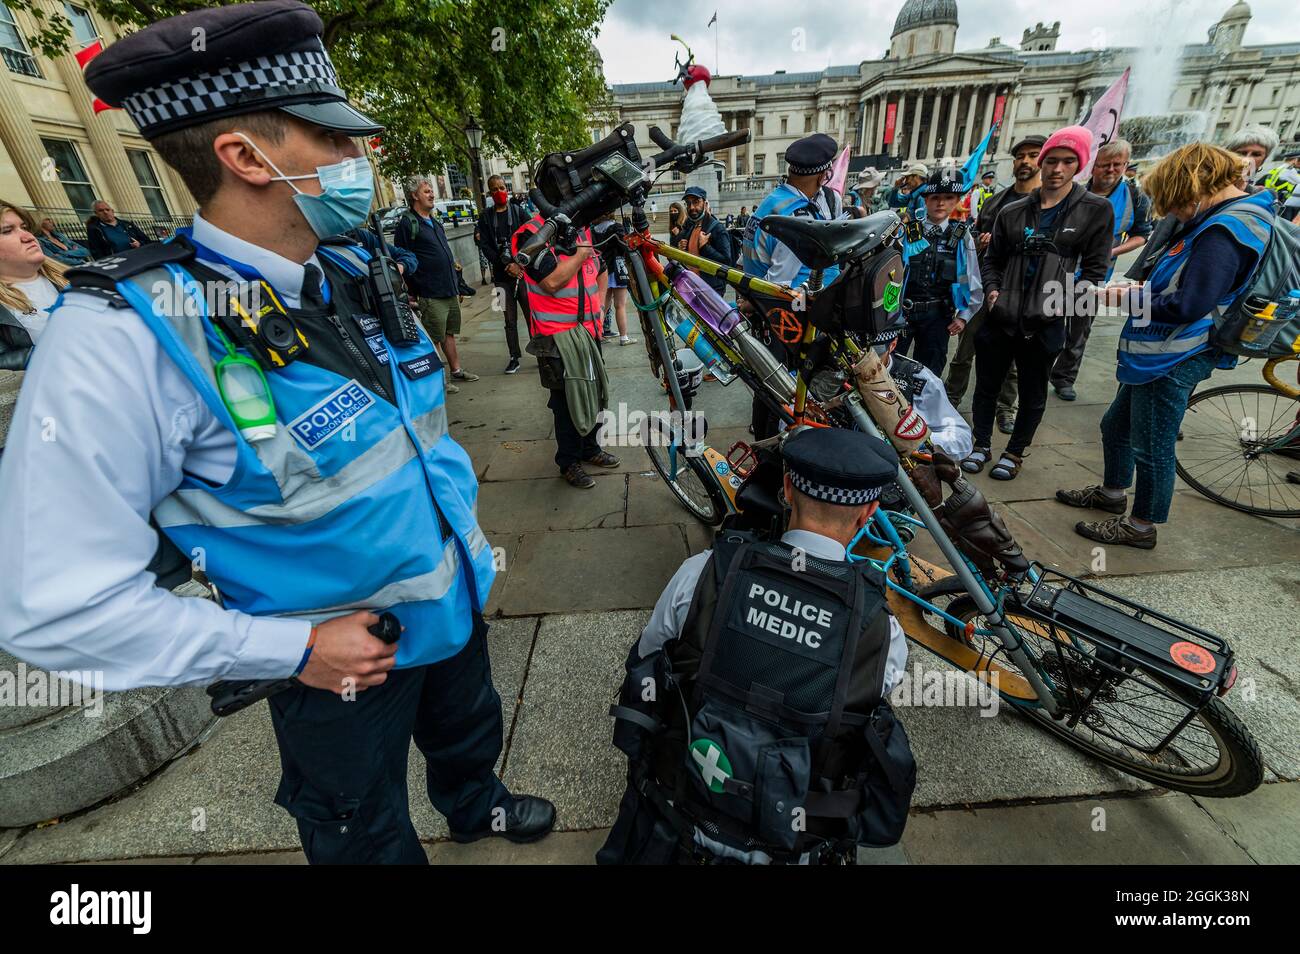 London, UK. 1st Sep, 2021. AA rebels bike is searched for glue - Extinction Rebellion continues its two weeks with a Greenwash protest ending in Trafalgar Square, under the overalll Impossible Rebellion name. Credit: Guy Bell/Alamy Live News Stock Photo